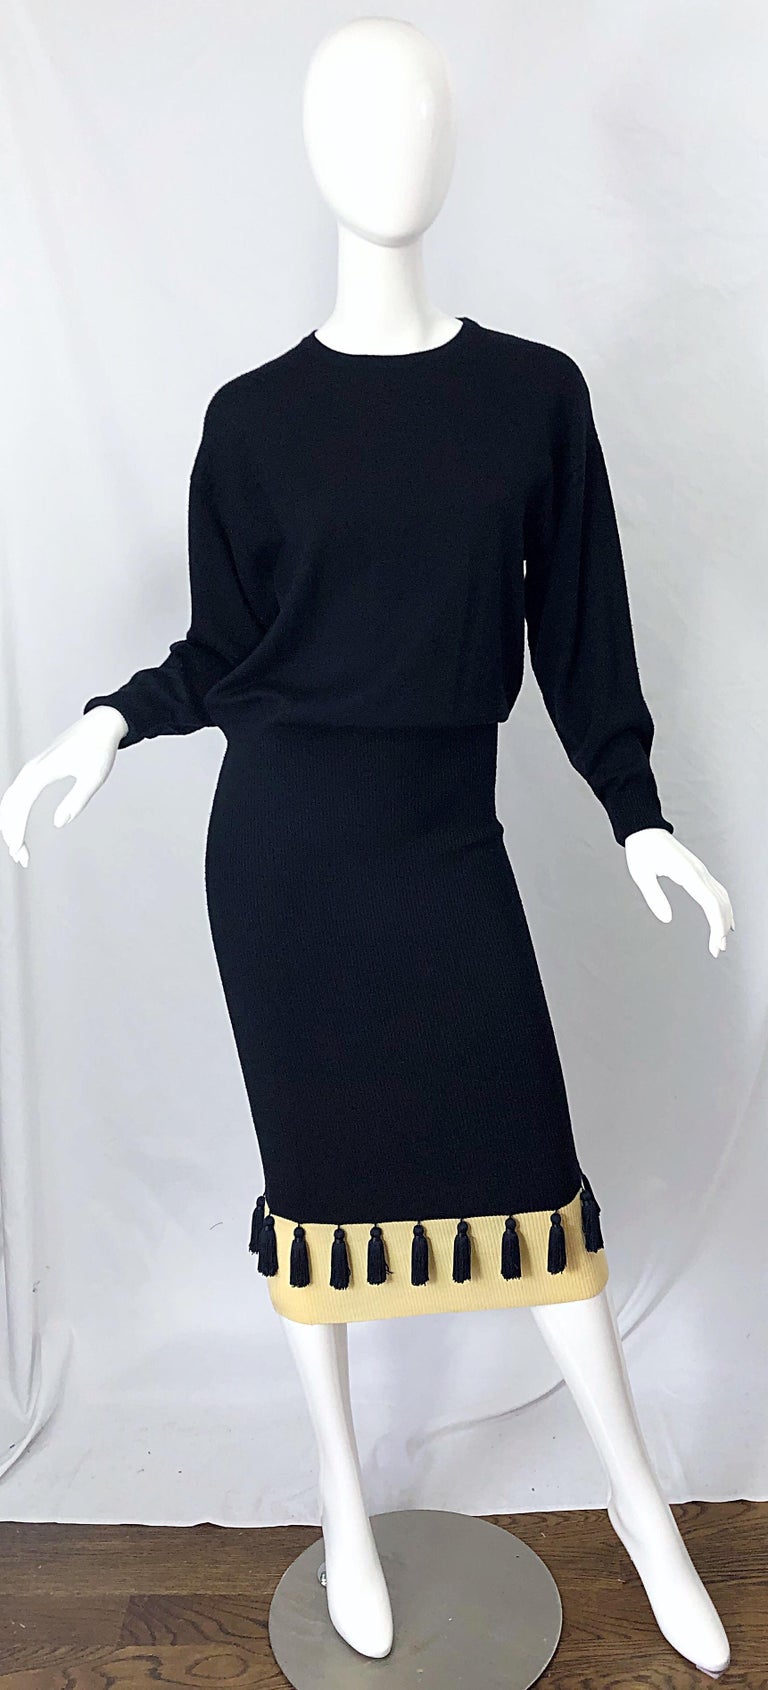 Chic vintage 80s ANGELO TARLAZZI black and ivory dolman sleeve sweater dress ! Features a luxurious soft wool that feels like cashmere. Black tassels line the hem of the dress. Simply slips over the head and stretches to fit. Slouchy fit with a drop